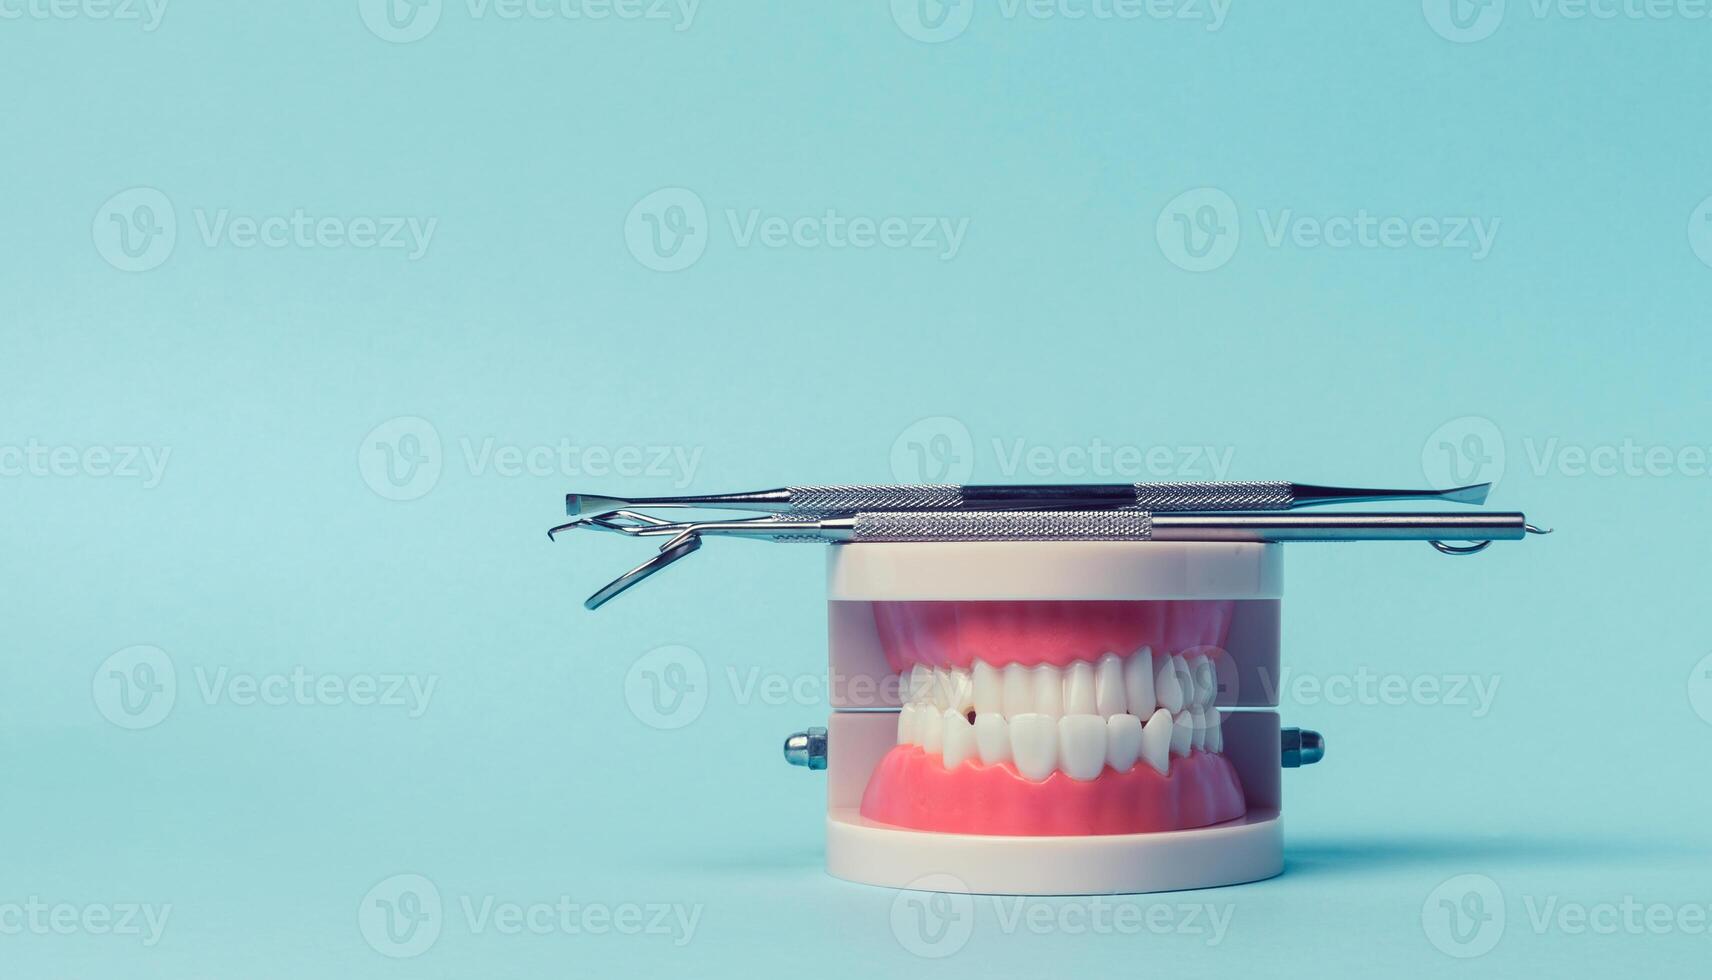 Plastic model of human jaw with white even teeth and a medical examination mirror, tweezers on a blue background, photo